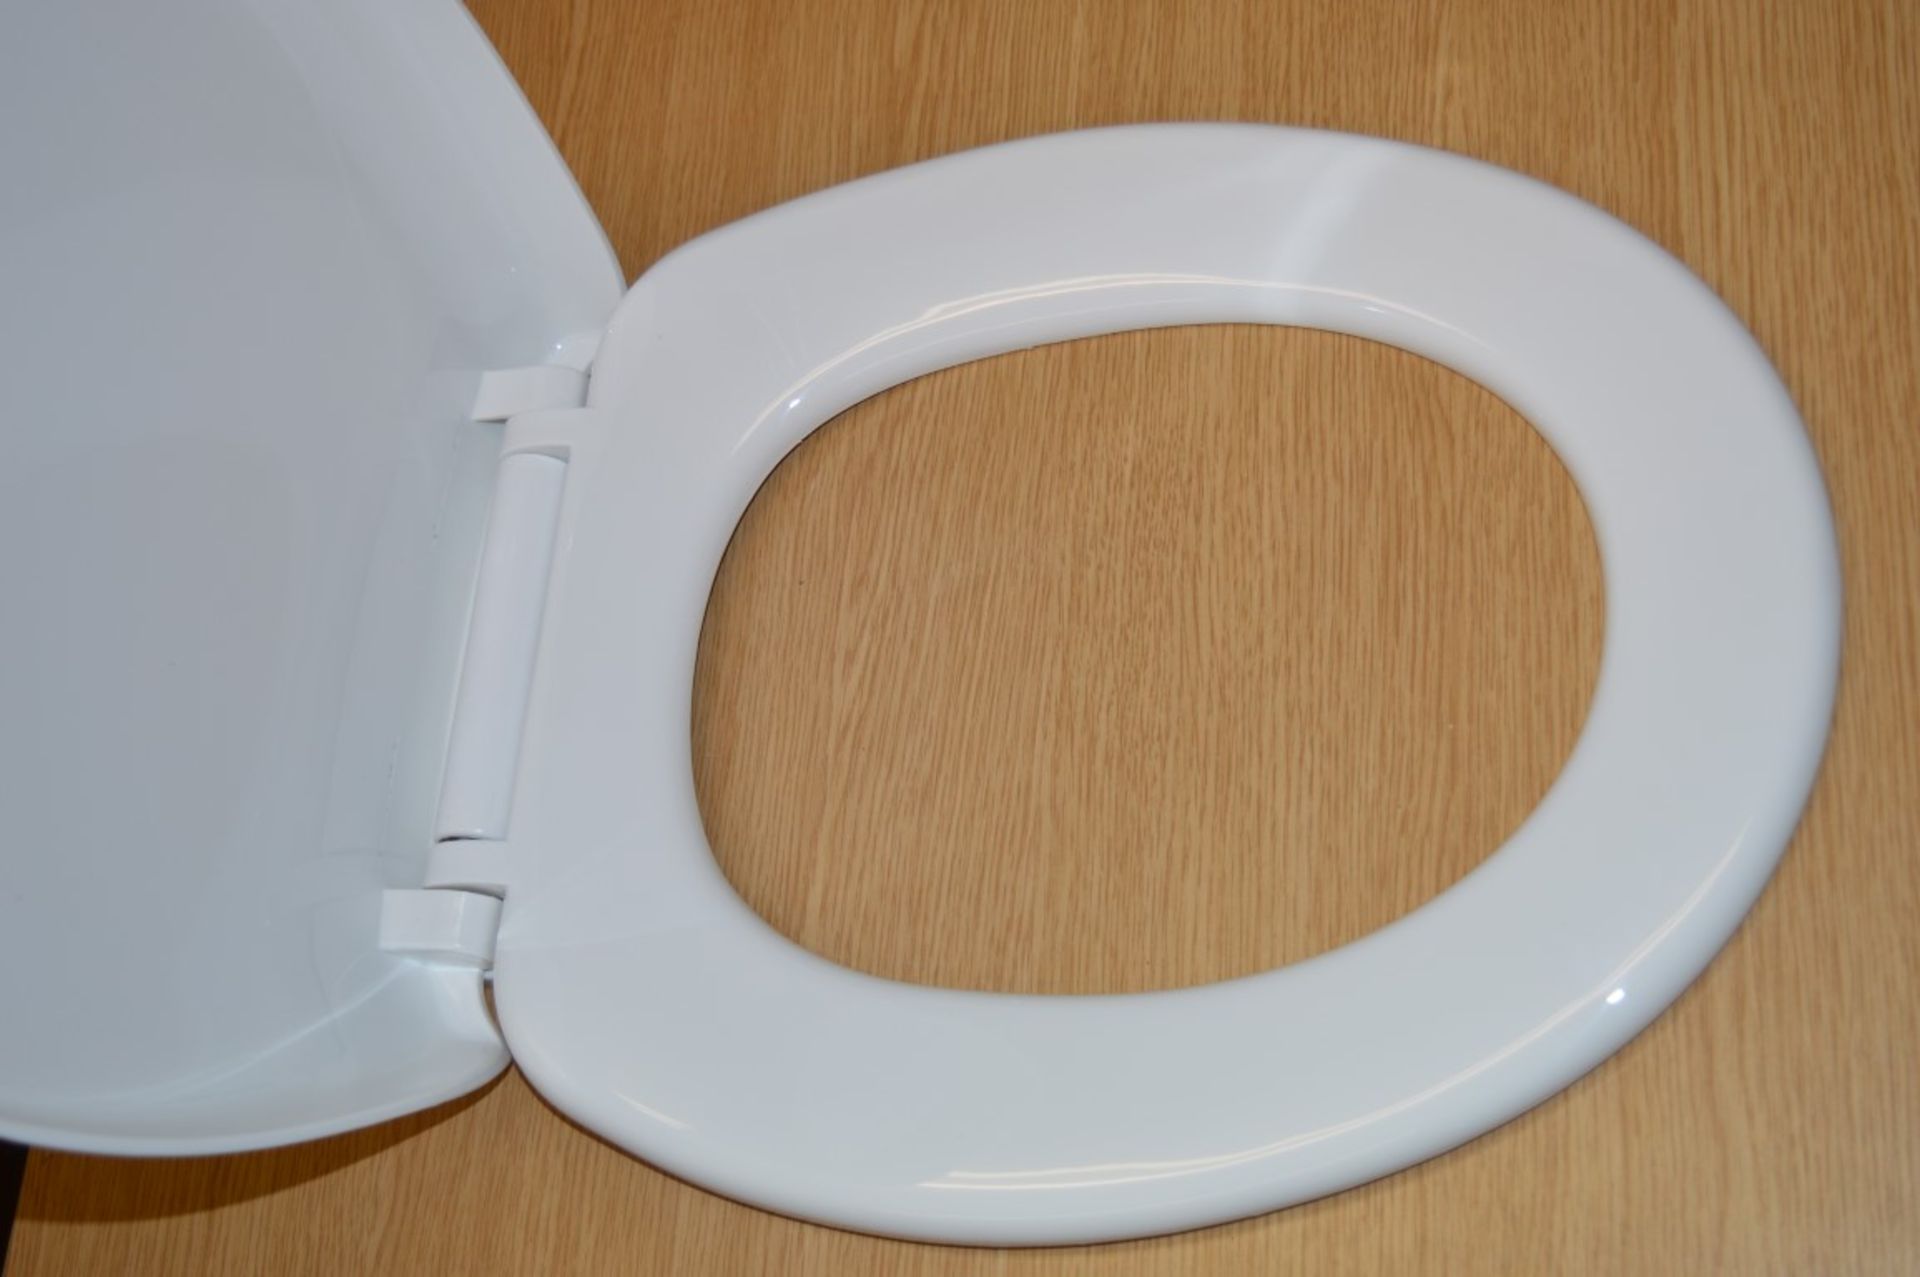 6 x Soft Close COMFORT Toilet Seats - Brand New Boxed Stock - CL034 - Ideal For Resale - Vogue - Image 2 of 7